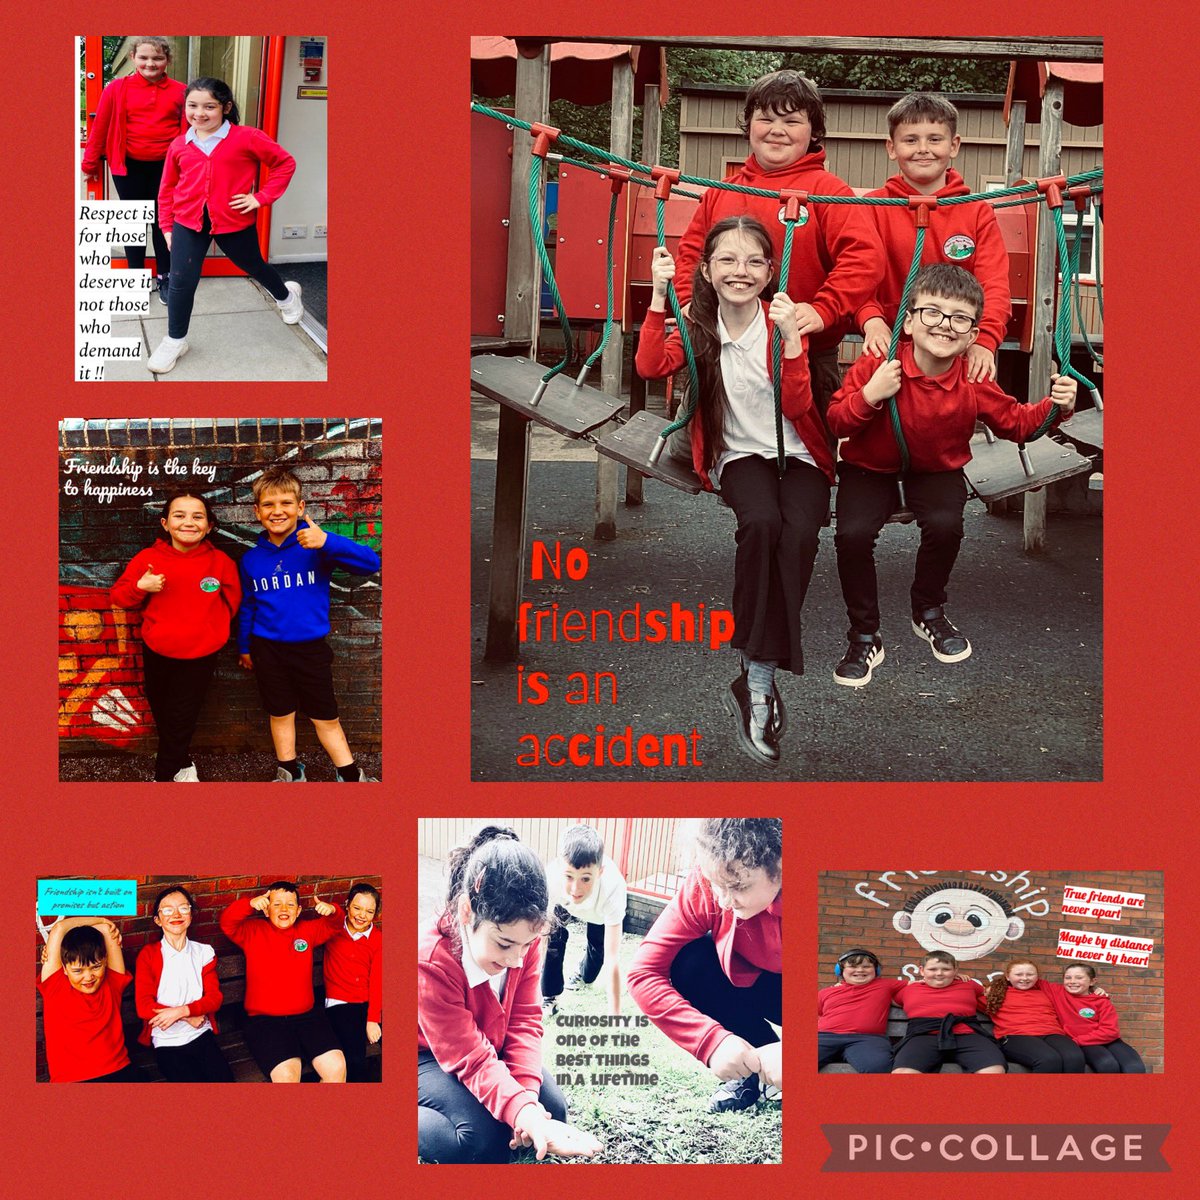 Great afternoon producing our own truism photography this afternoon. The children showed resilience and creativity to capture images and generated quotes to demonstrate our 6 school values. Da iawn blwyddyn 4 📸📸📸 @NantYParcSchool